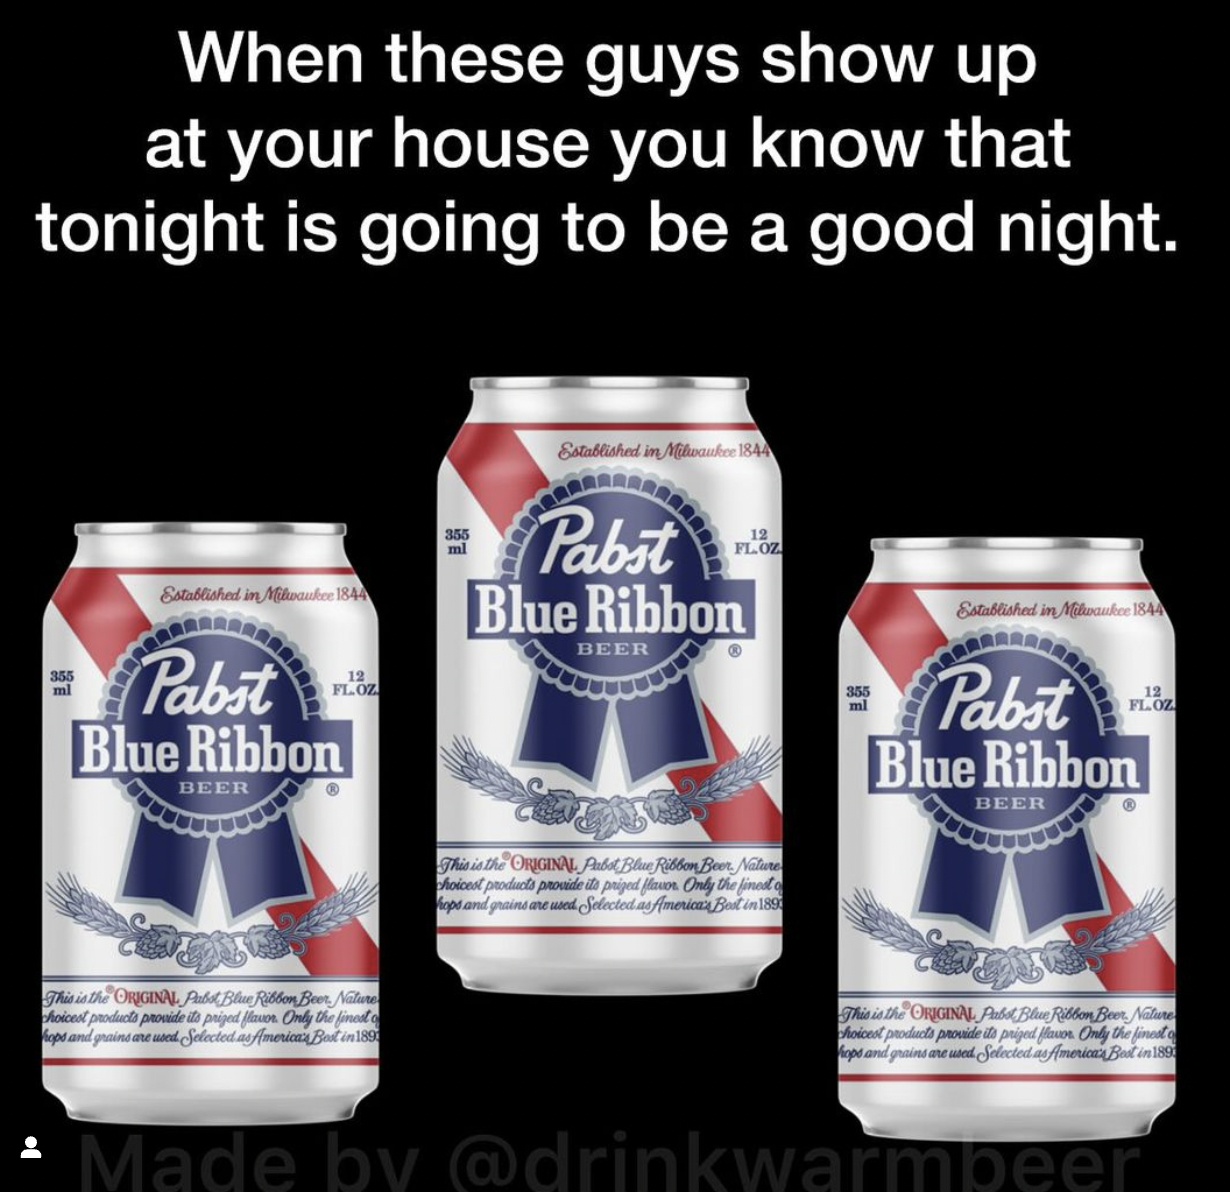 food - When these guys show up at your house you know that tonight is going to be a good night. Established in 18 Established in 1844 Pabst Blue Ribbon Beer Ploz Pabst Blue Ribbon Beer Flor po po pred Only the f Established Pabst Blue Ribbon Beer Made by